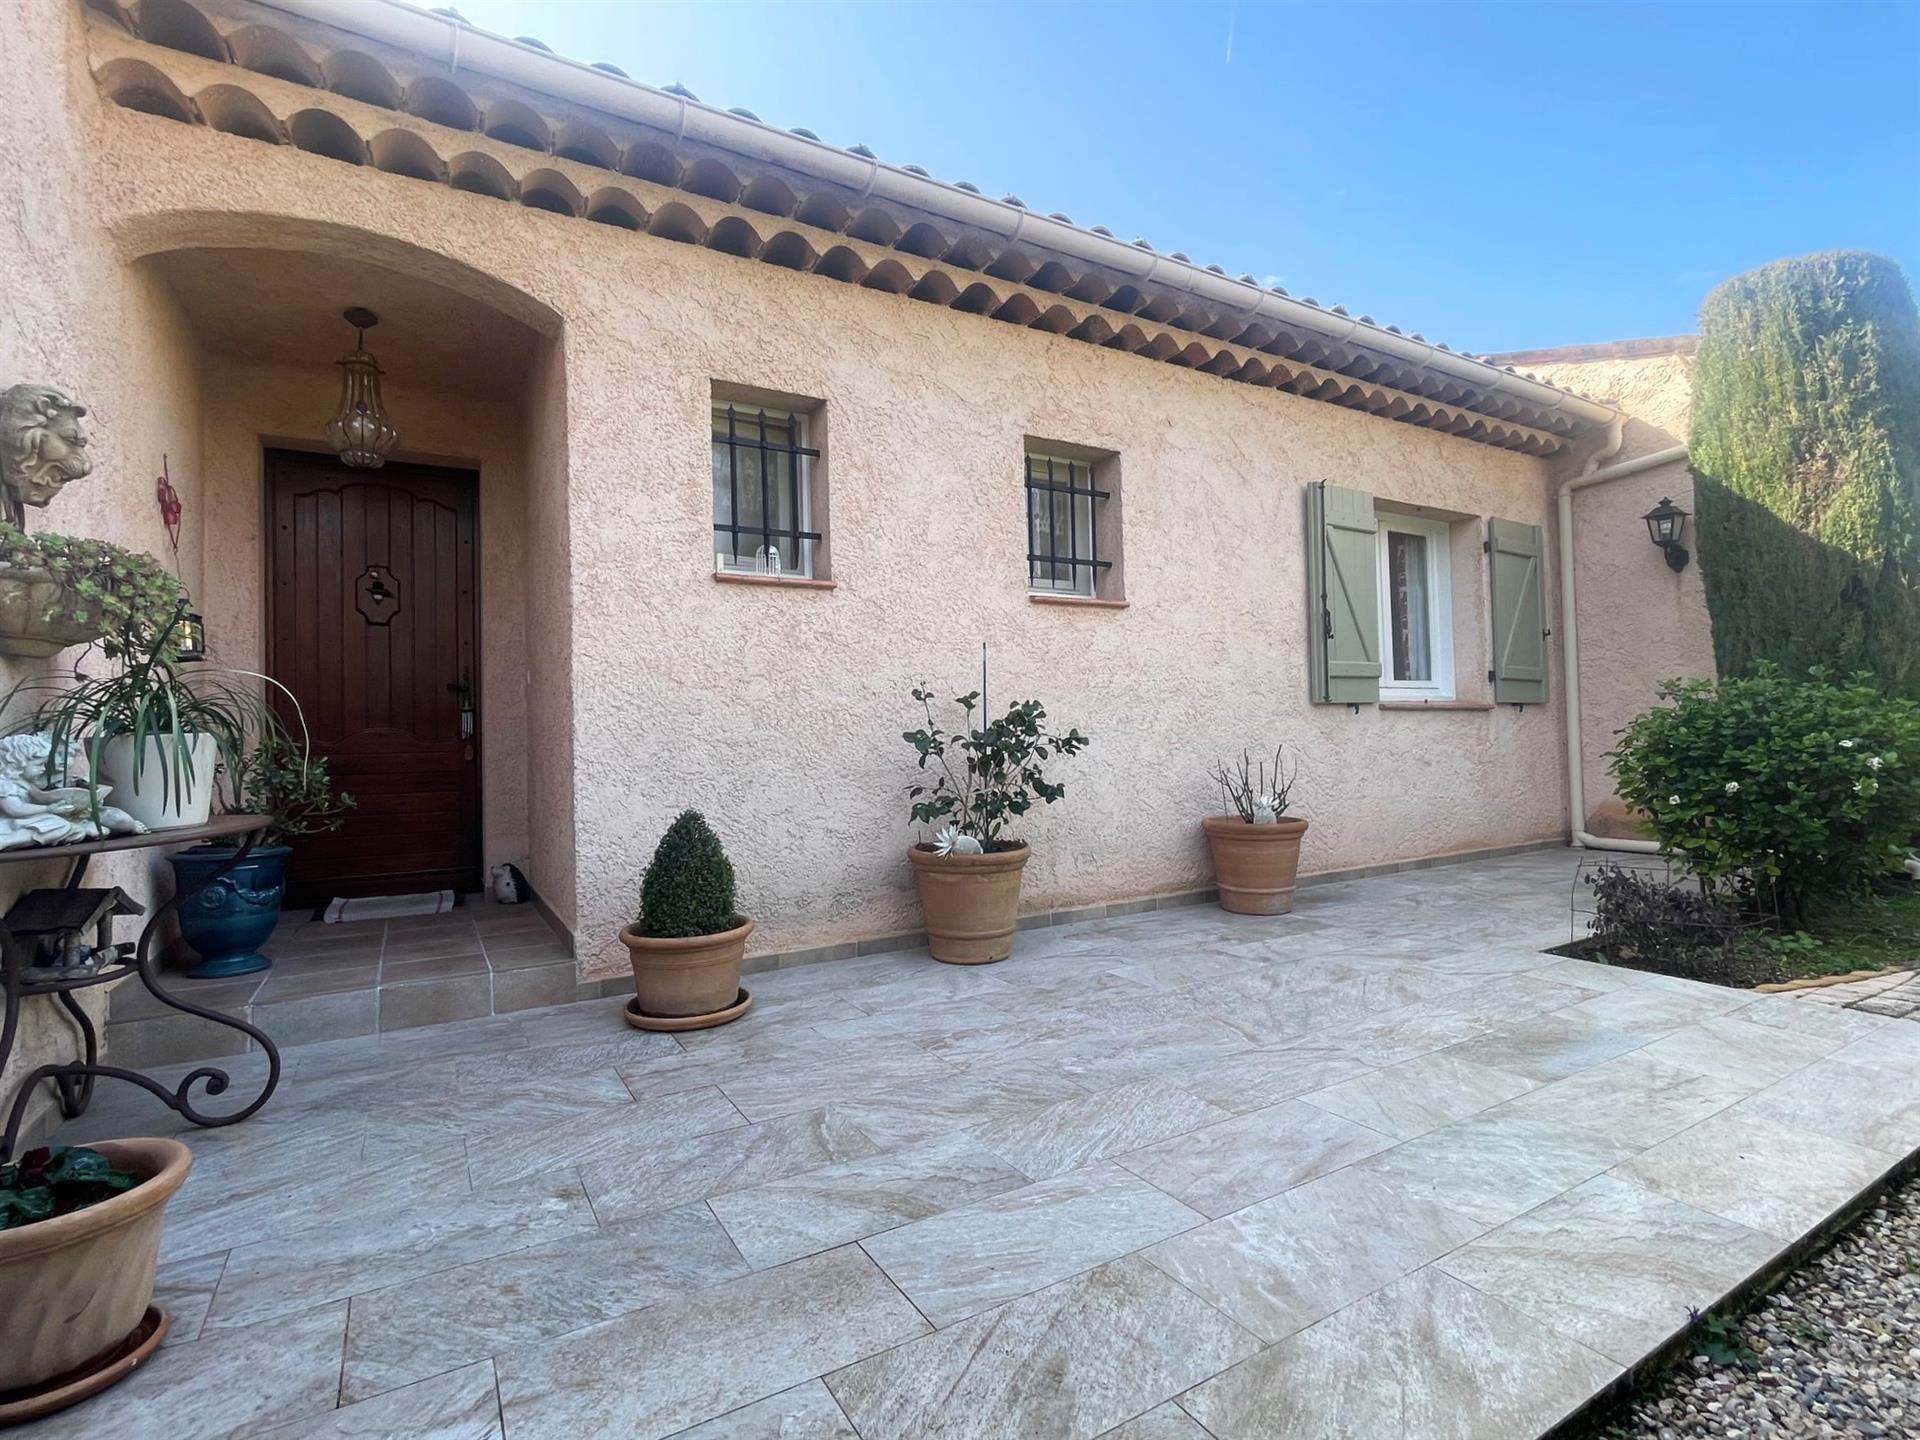 Pretty traditional villa with 3-4 bedrooms, swimming pool, garage, in a quiet location close to the 